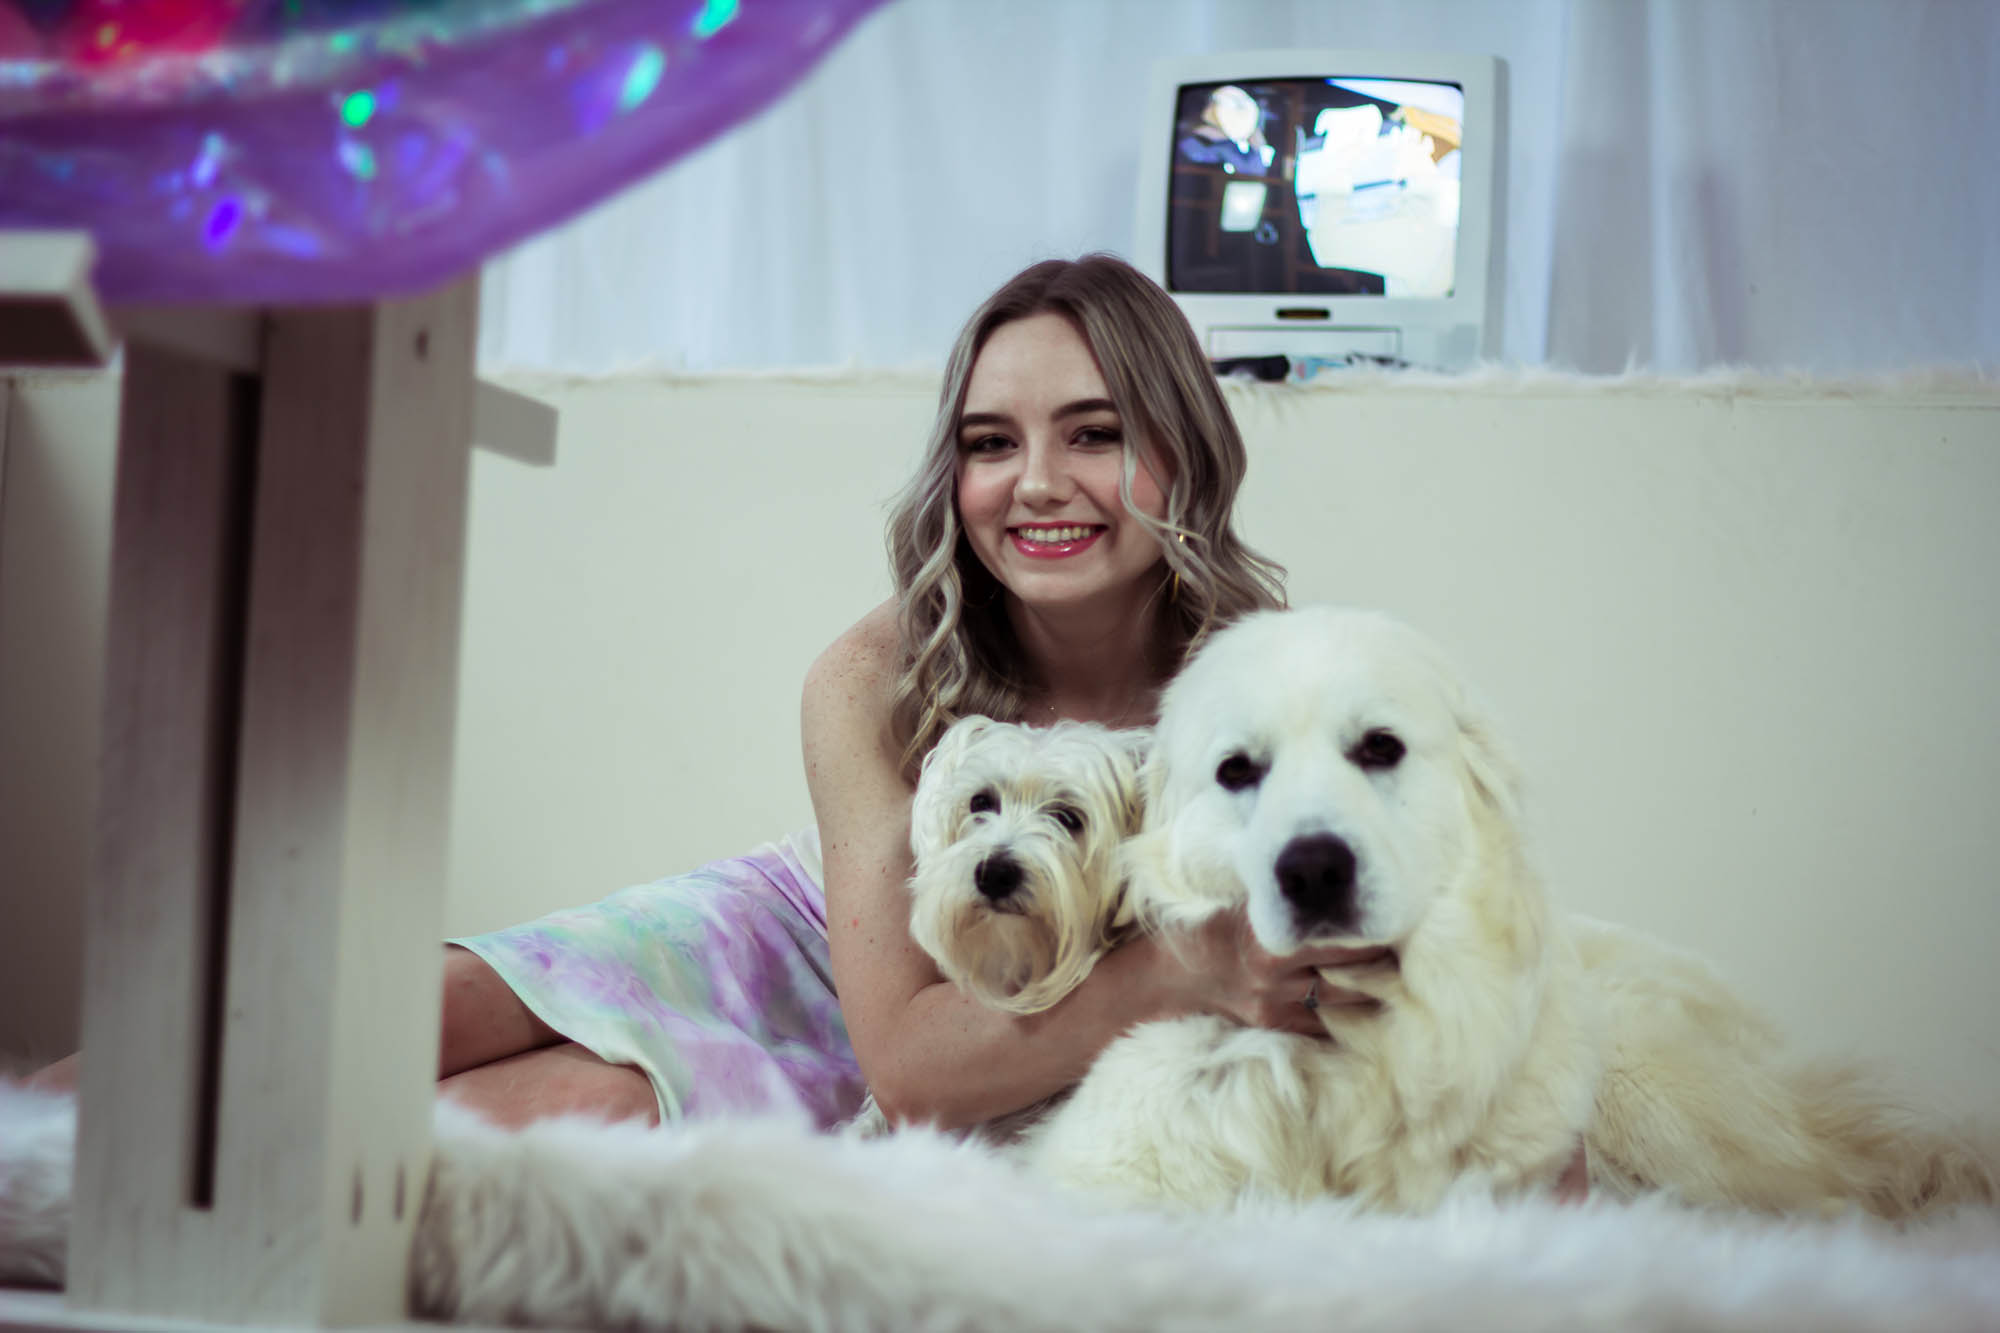 My dogs are a huge inspiration for all of the white fur. I wanted to create an inviting and comforting environment for my viewers. I just knew if I could include my puppies comforting fur that it would complete the experience.